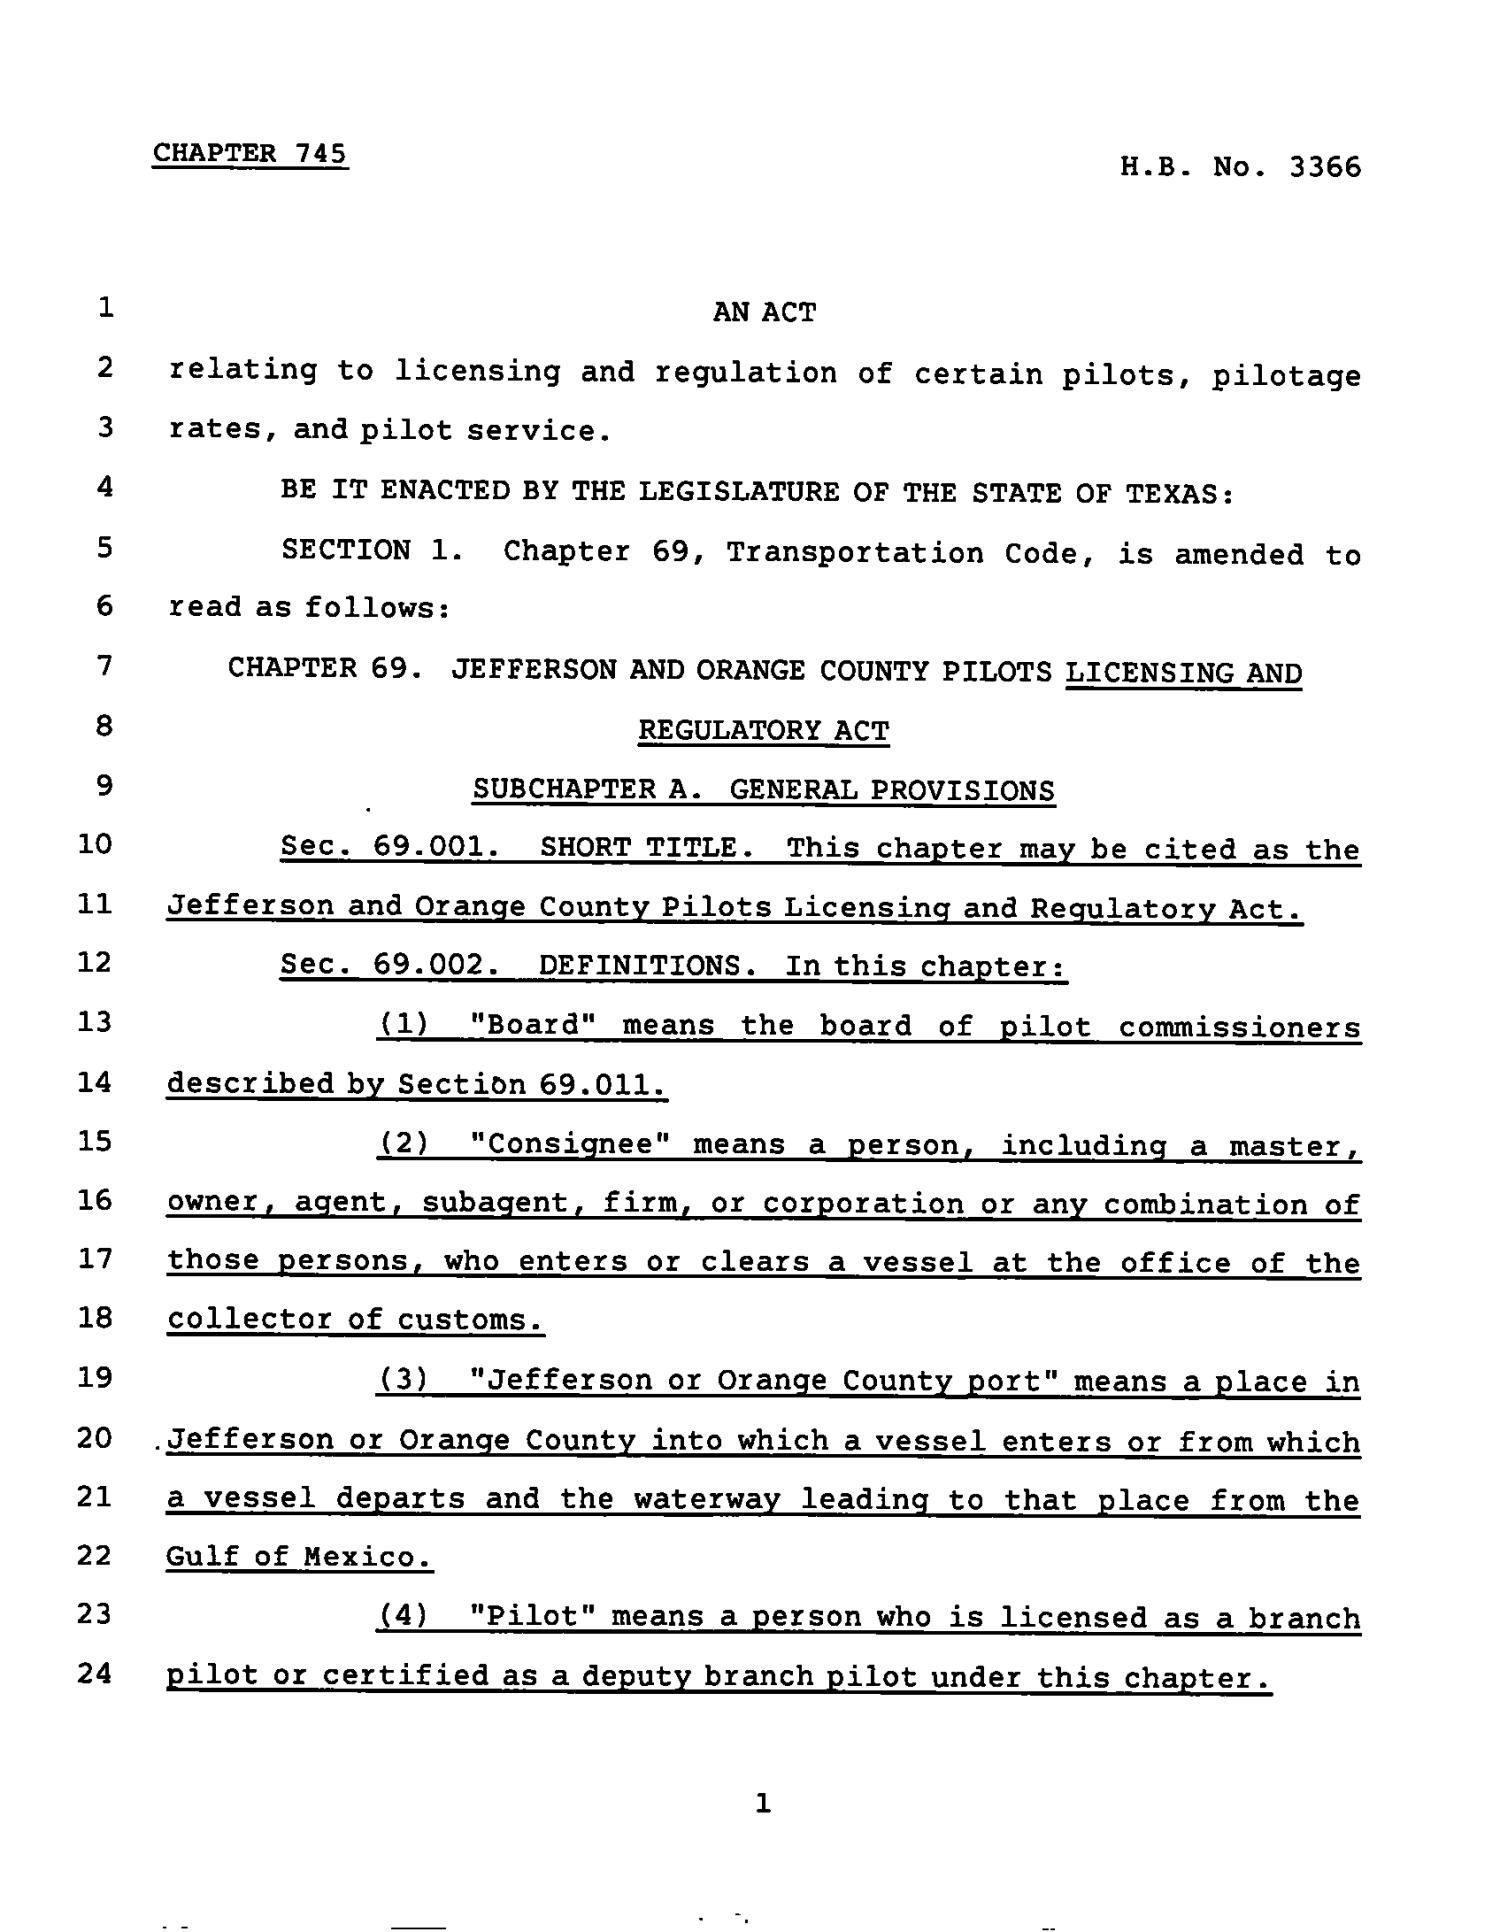 78th Texas Legislature, Regular Session, House Bill 3366, Chapter 745
                                                
                                                    [Sequence #]: 1 of 28
                                                